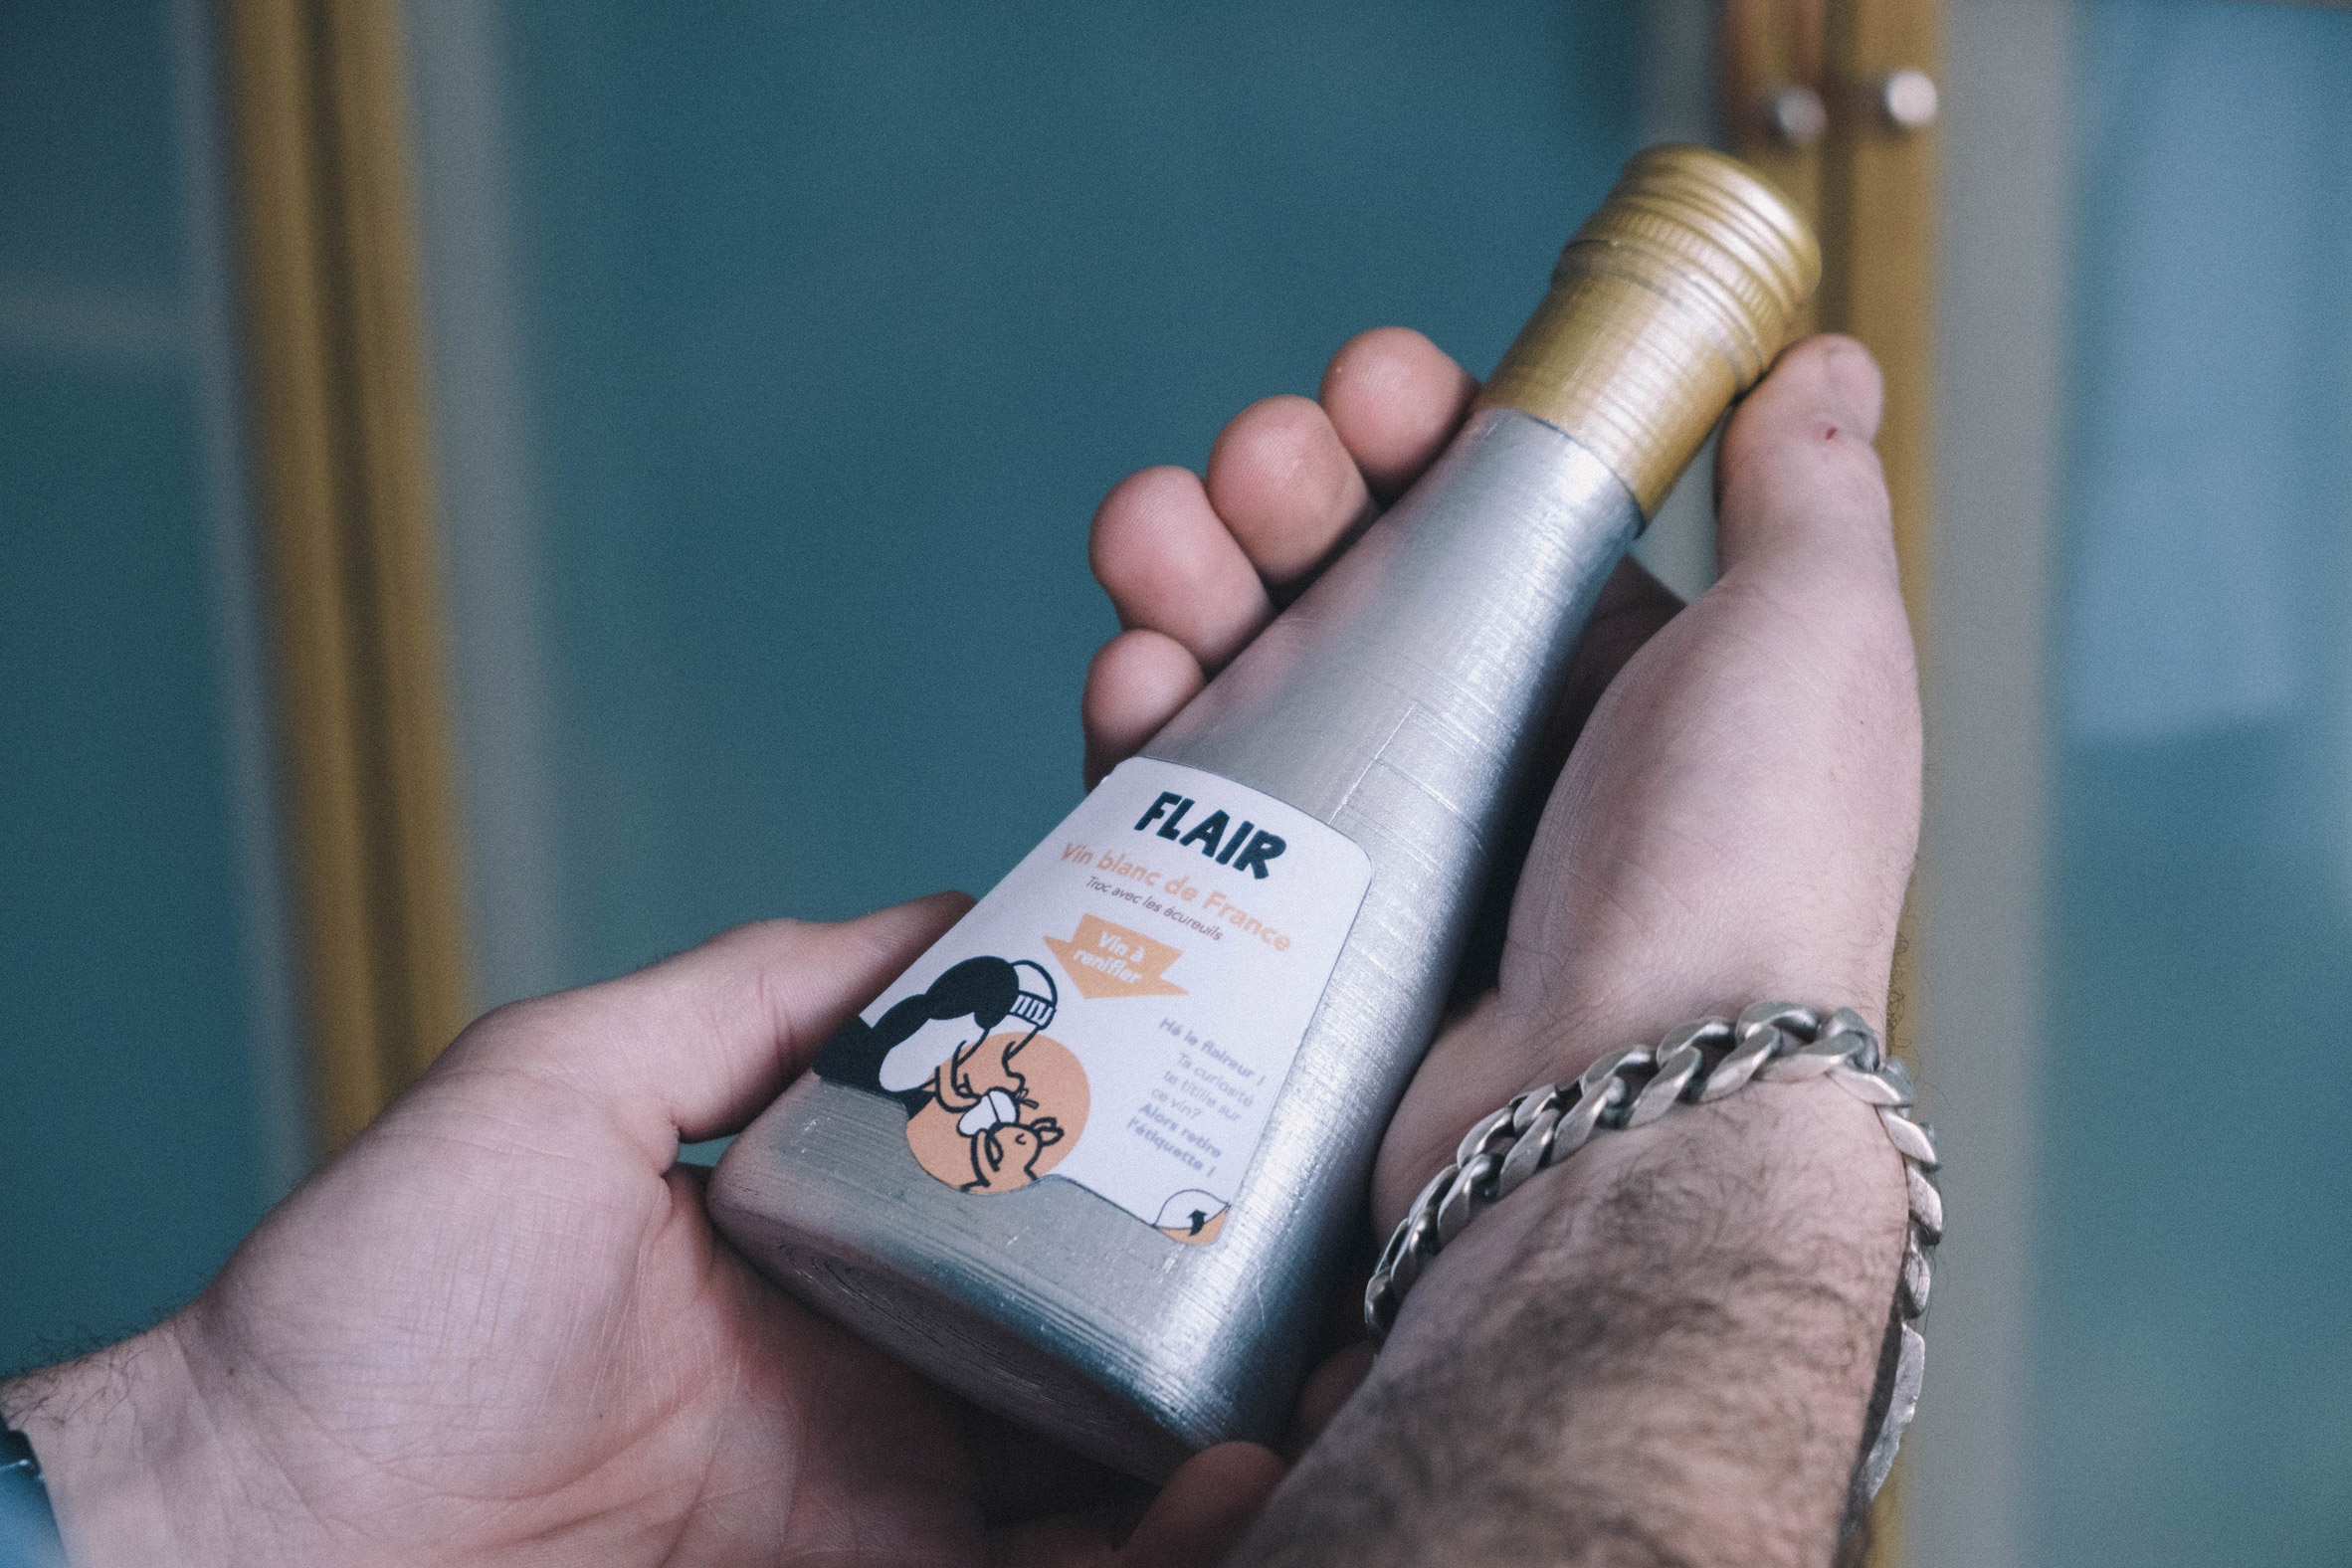 Person holding Flair wine bottle